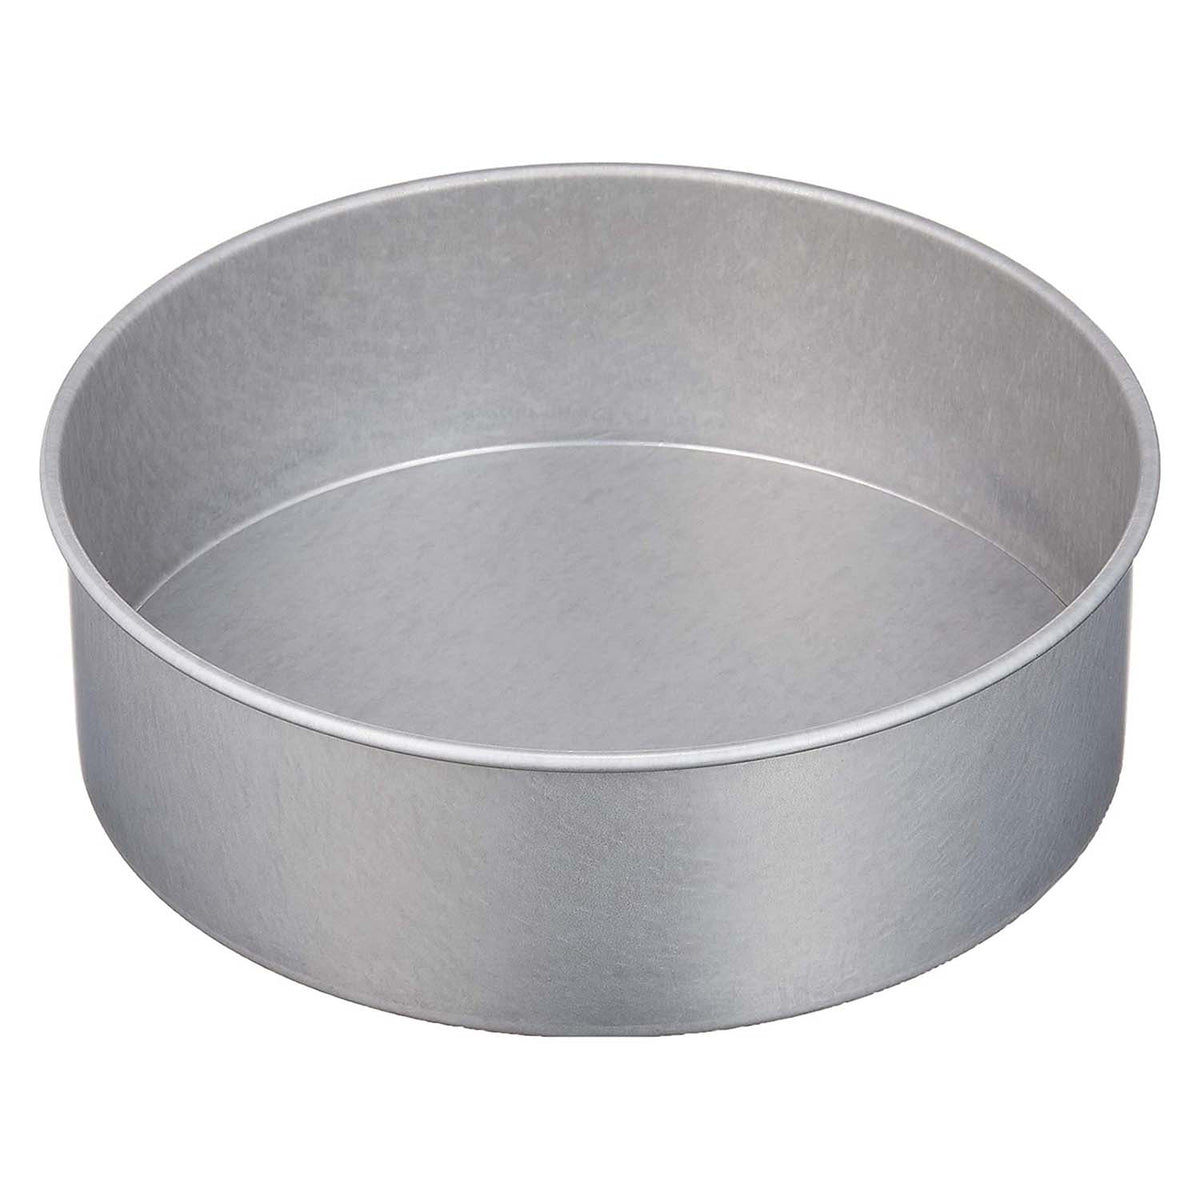 Buy Specialty & Novelty Cake Pans online at Best Prices in Uganda